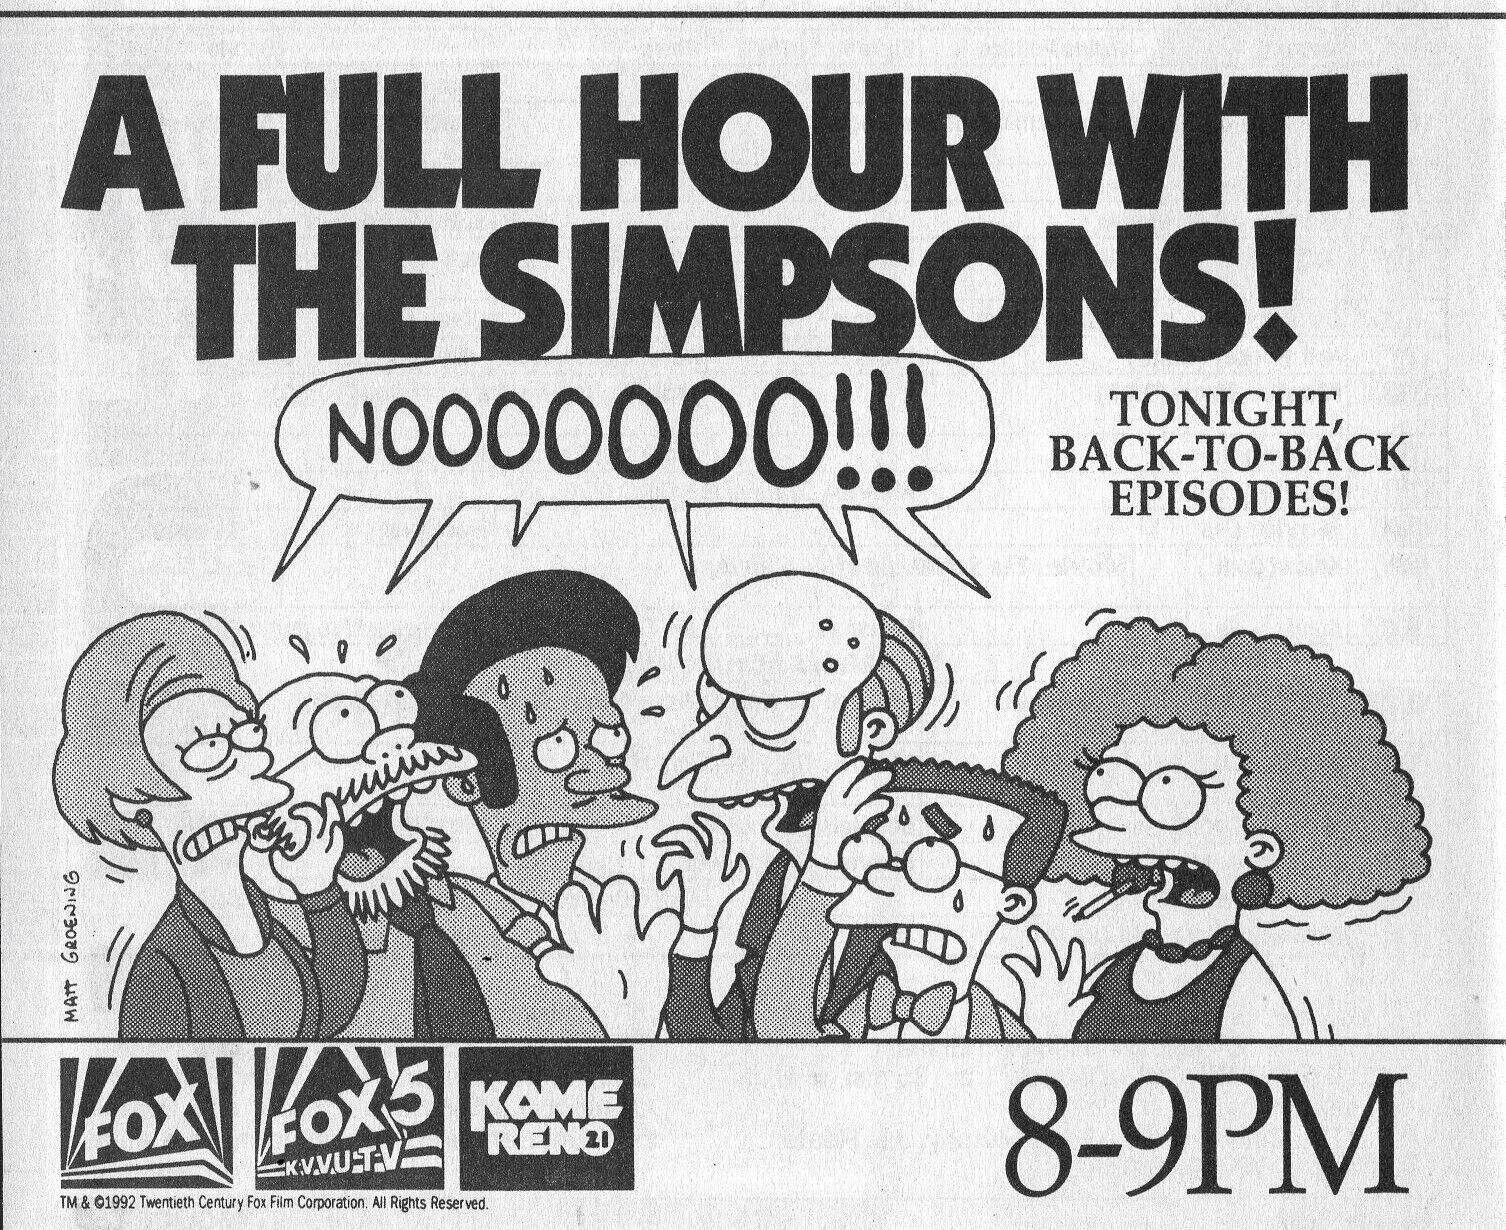 1992 FOX & KAME RENO,NEVADA TV AD ~ THE SIMPSONS BACK TO BACK EPISODES